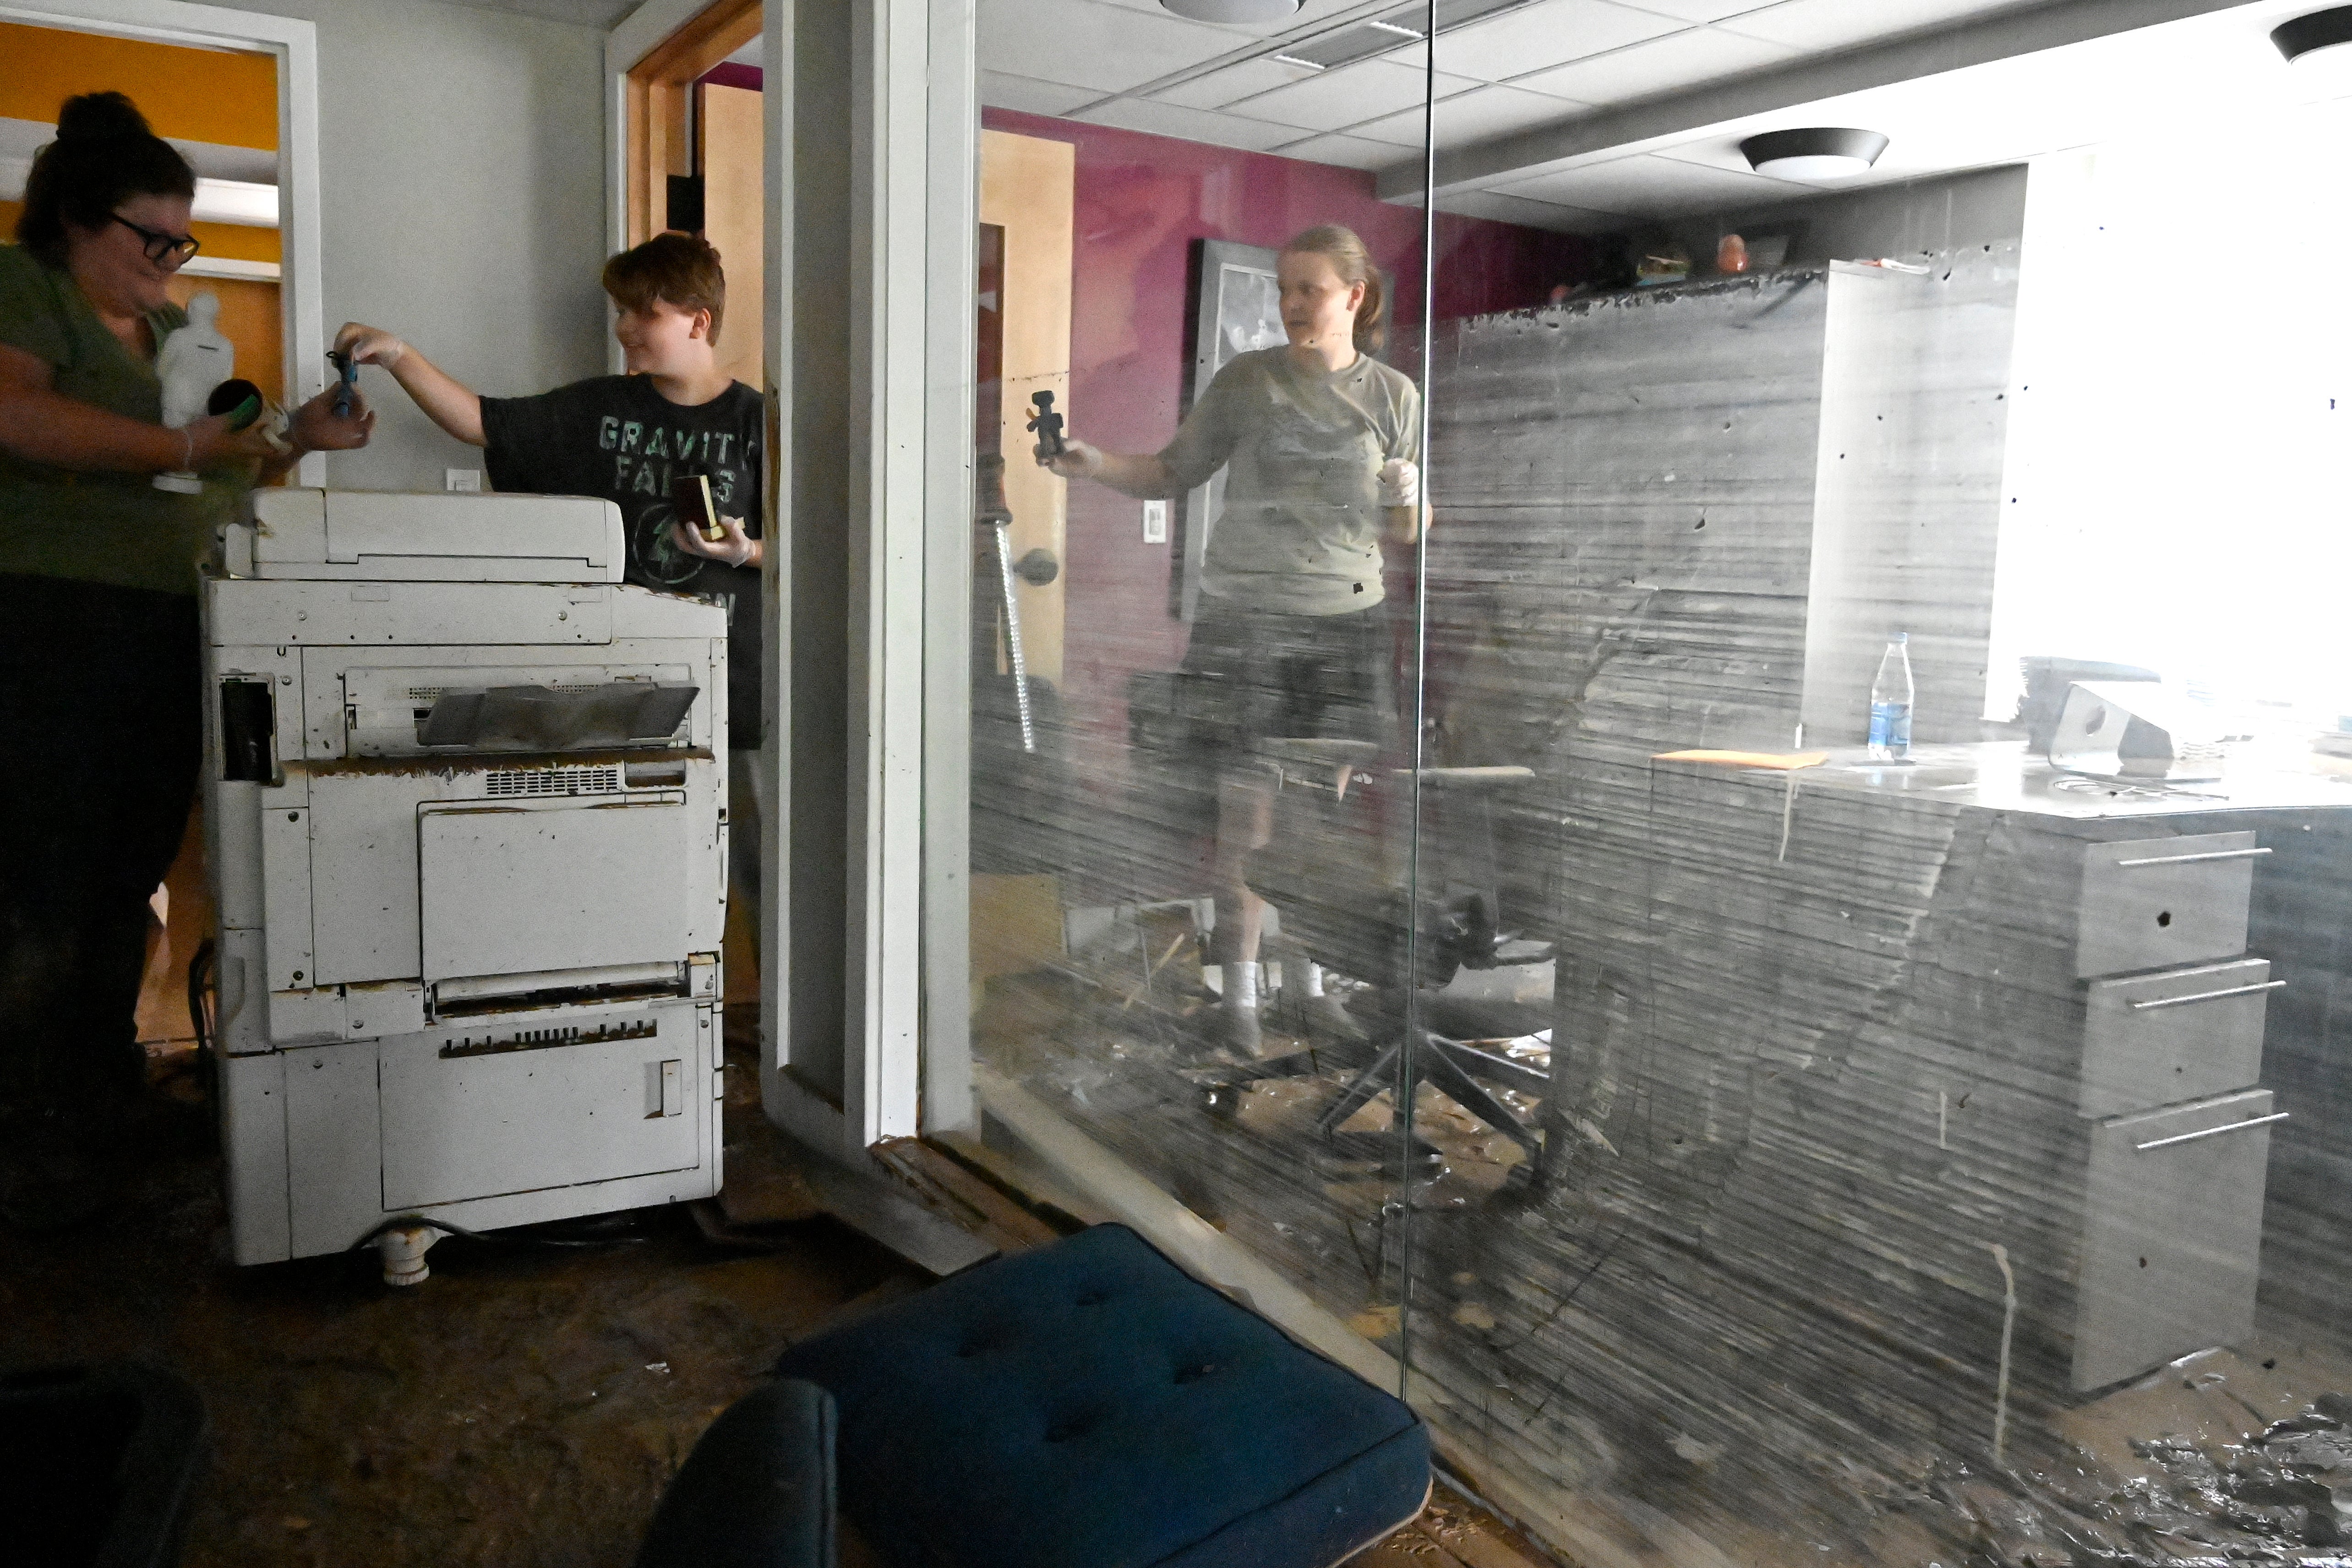 Employees of the Hindman Settlement School clean out the offices of the  school following flooding in Hindman, Ky., Friday, July 29, 2022. (Photo: Timothy D. Easley, AP)